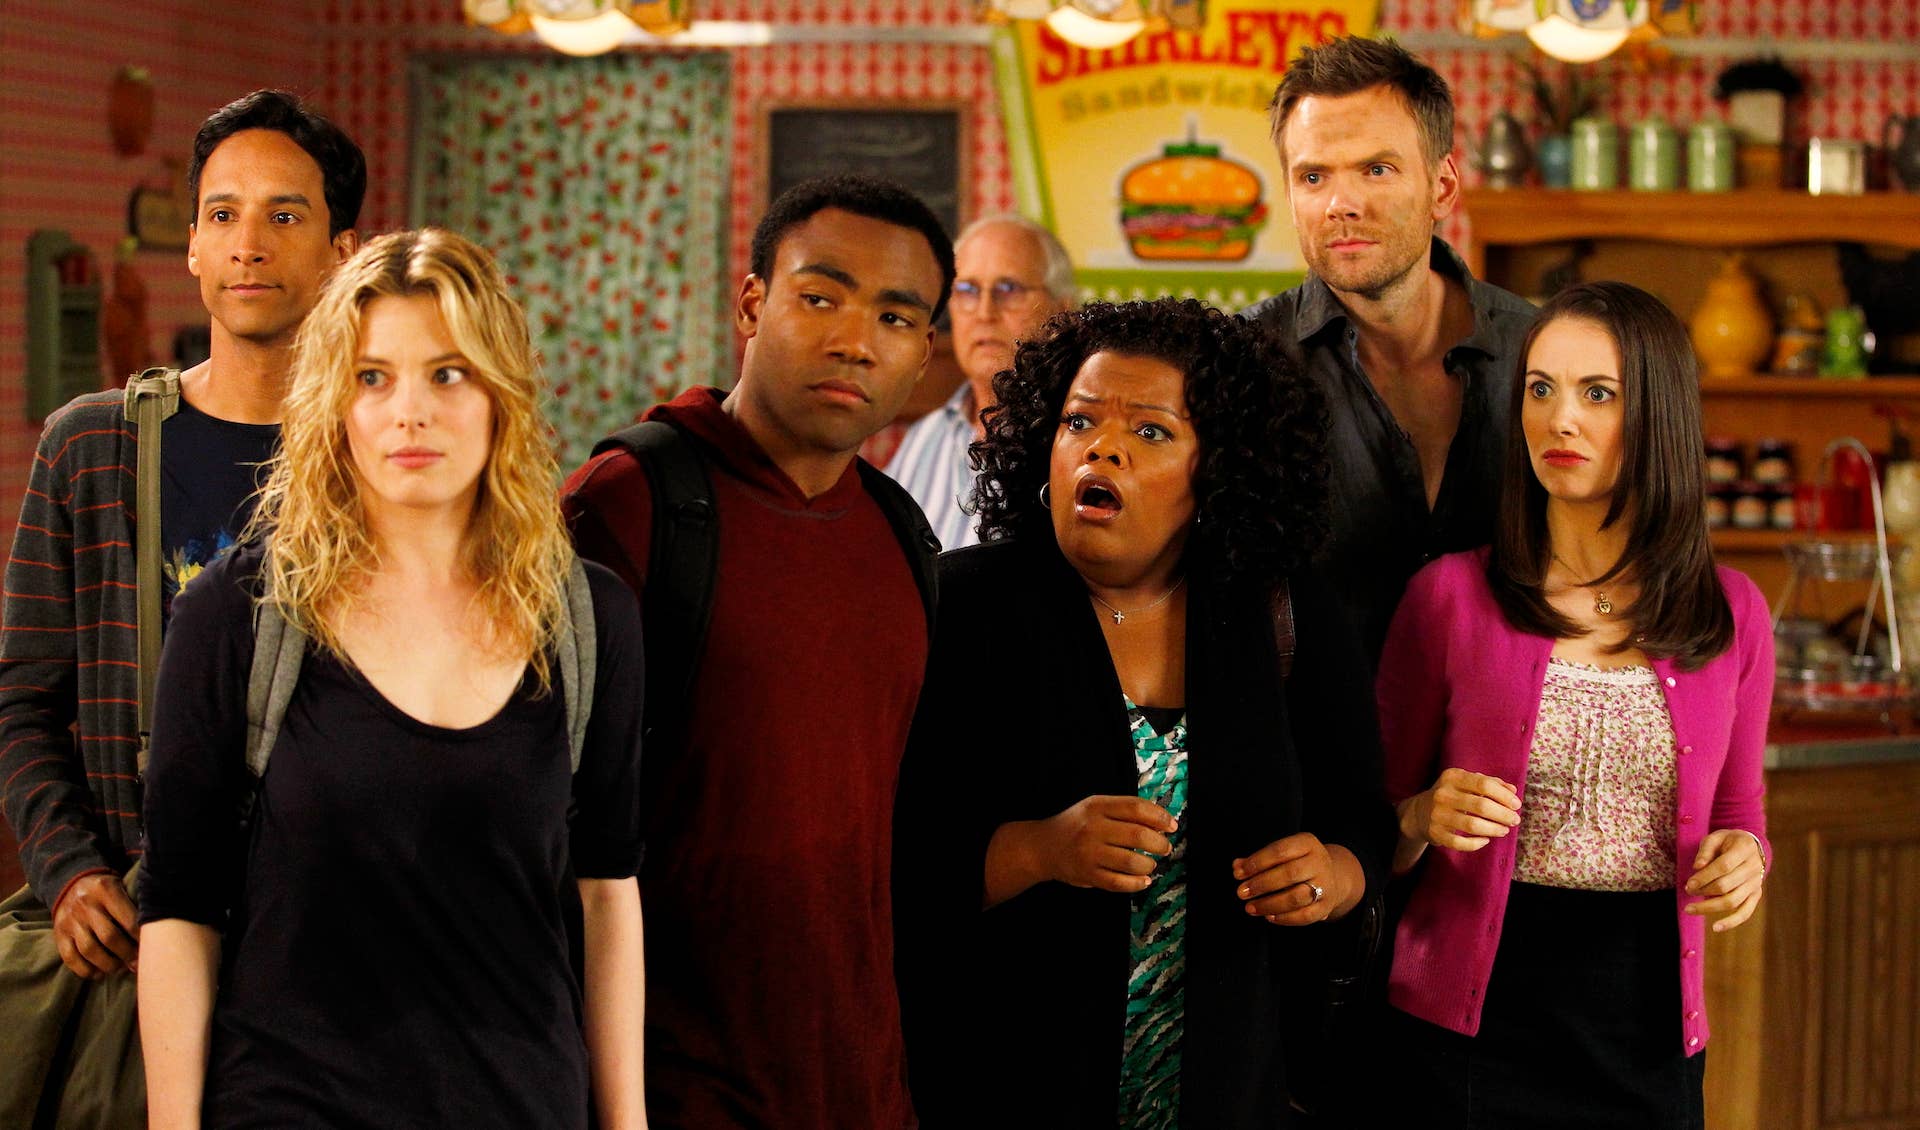 Community cast in still from show